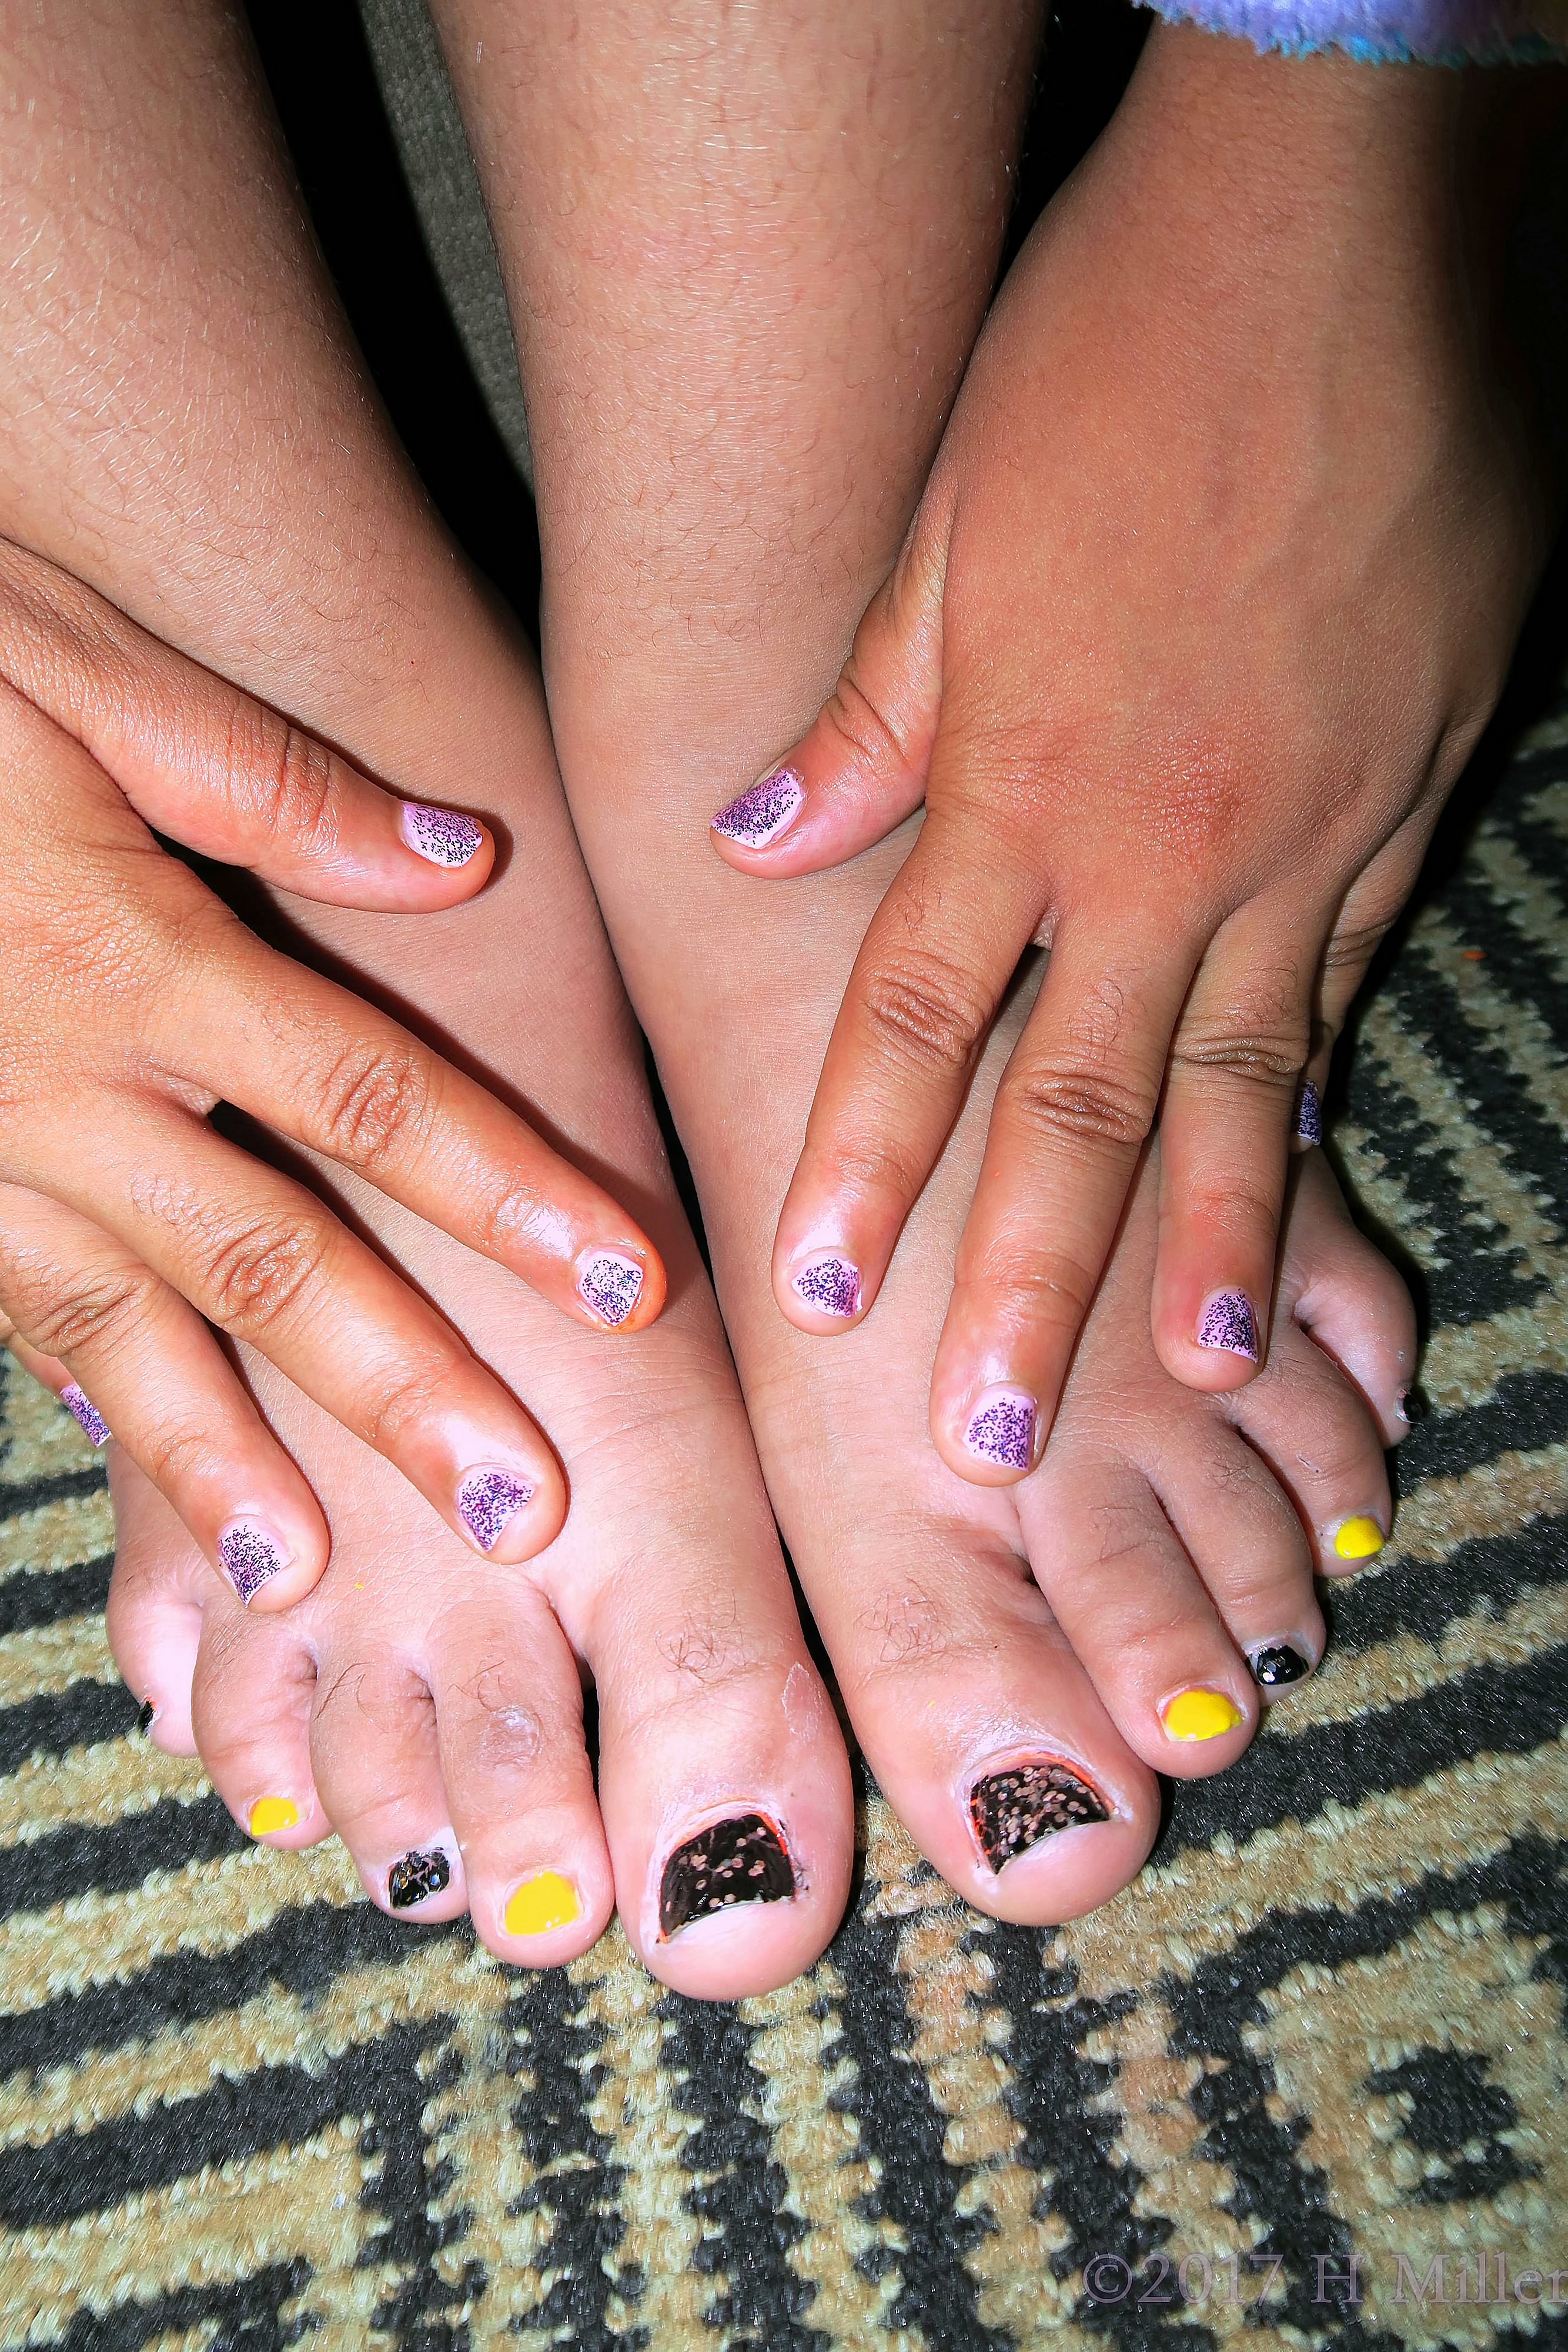 This Kids Mani And Girls Pedi Together! 